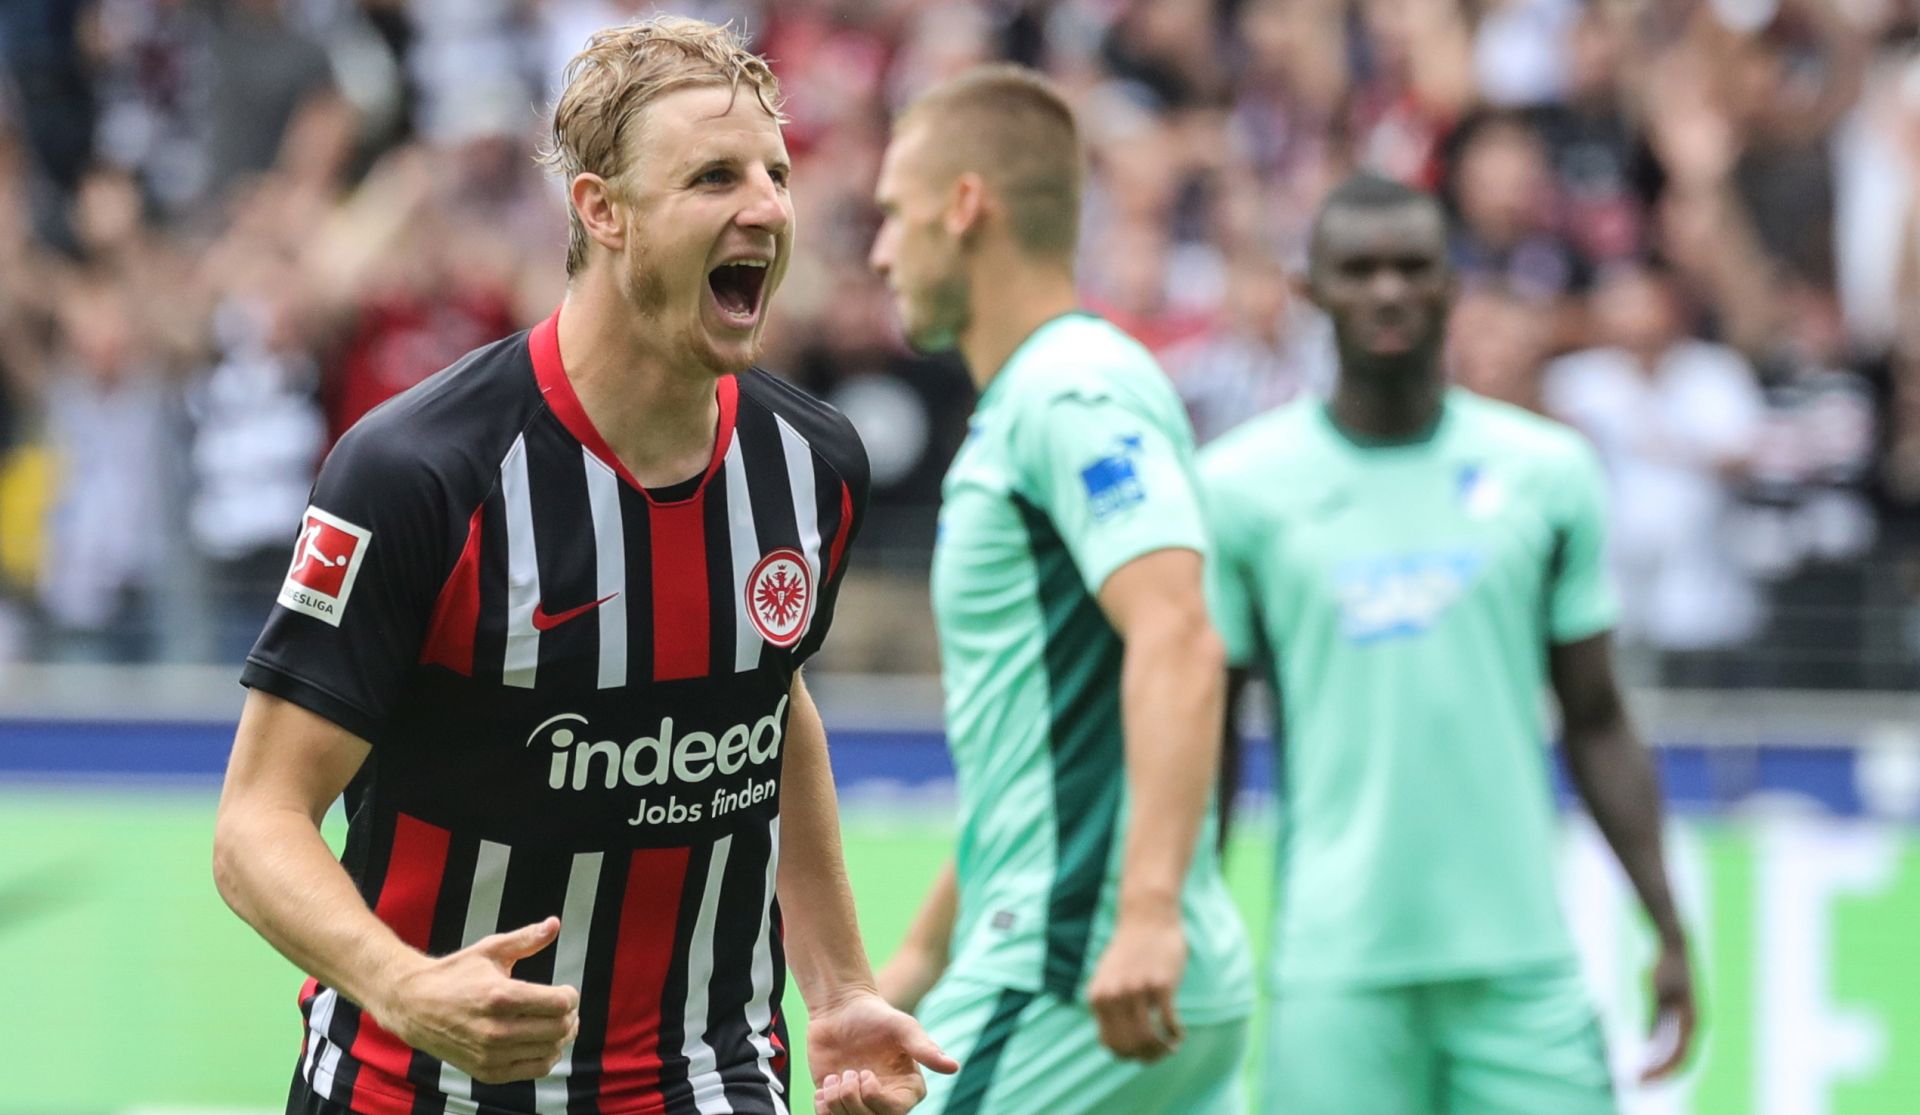 epa07779306 Frankfurt's Martin Hinteregger (L) celebrates scoring the opening goal during the German Bundesliga soccer match between Eintracht Frankfurt and TSG Hoffenheim in Frankfurt Main, Germany, 18 August 2019.  EPA/ARMANDO BABANI CONDITIONS - ATTENTION: The DFL regulations prohibit any use of photographs as image sequences and/or quasi-video